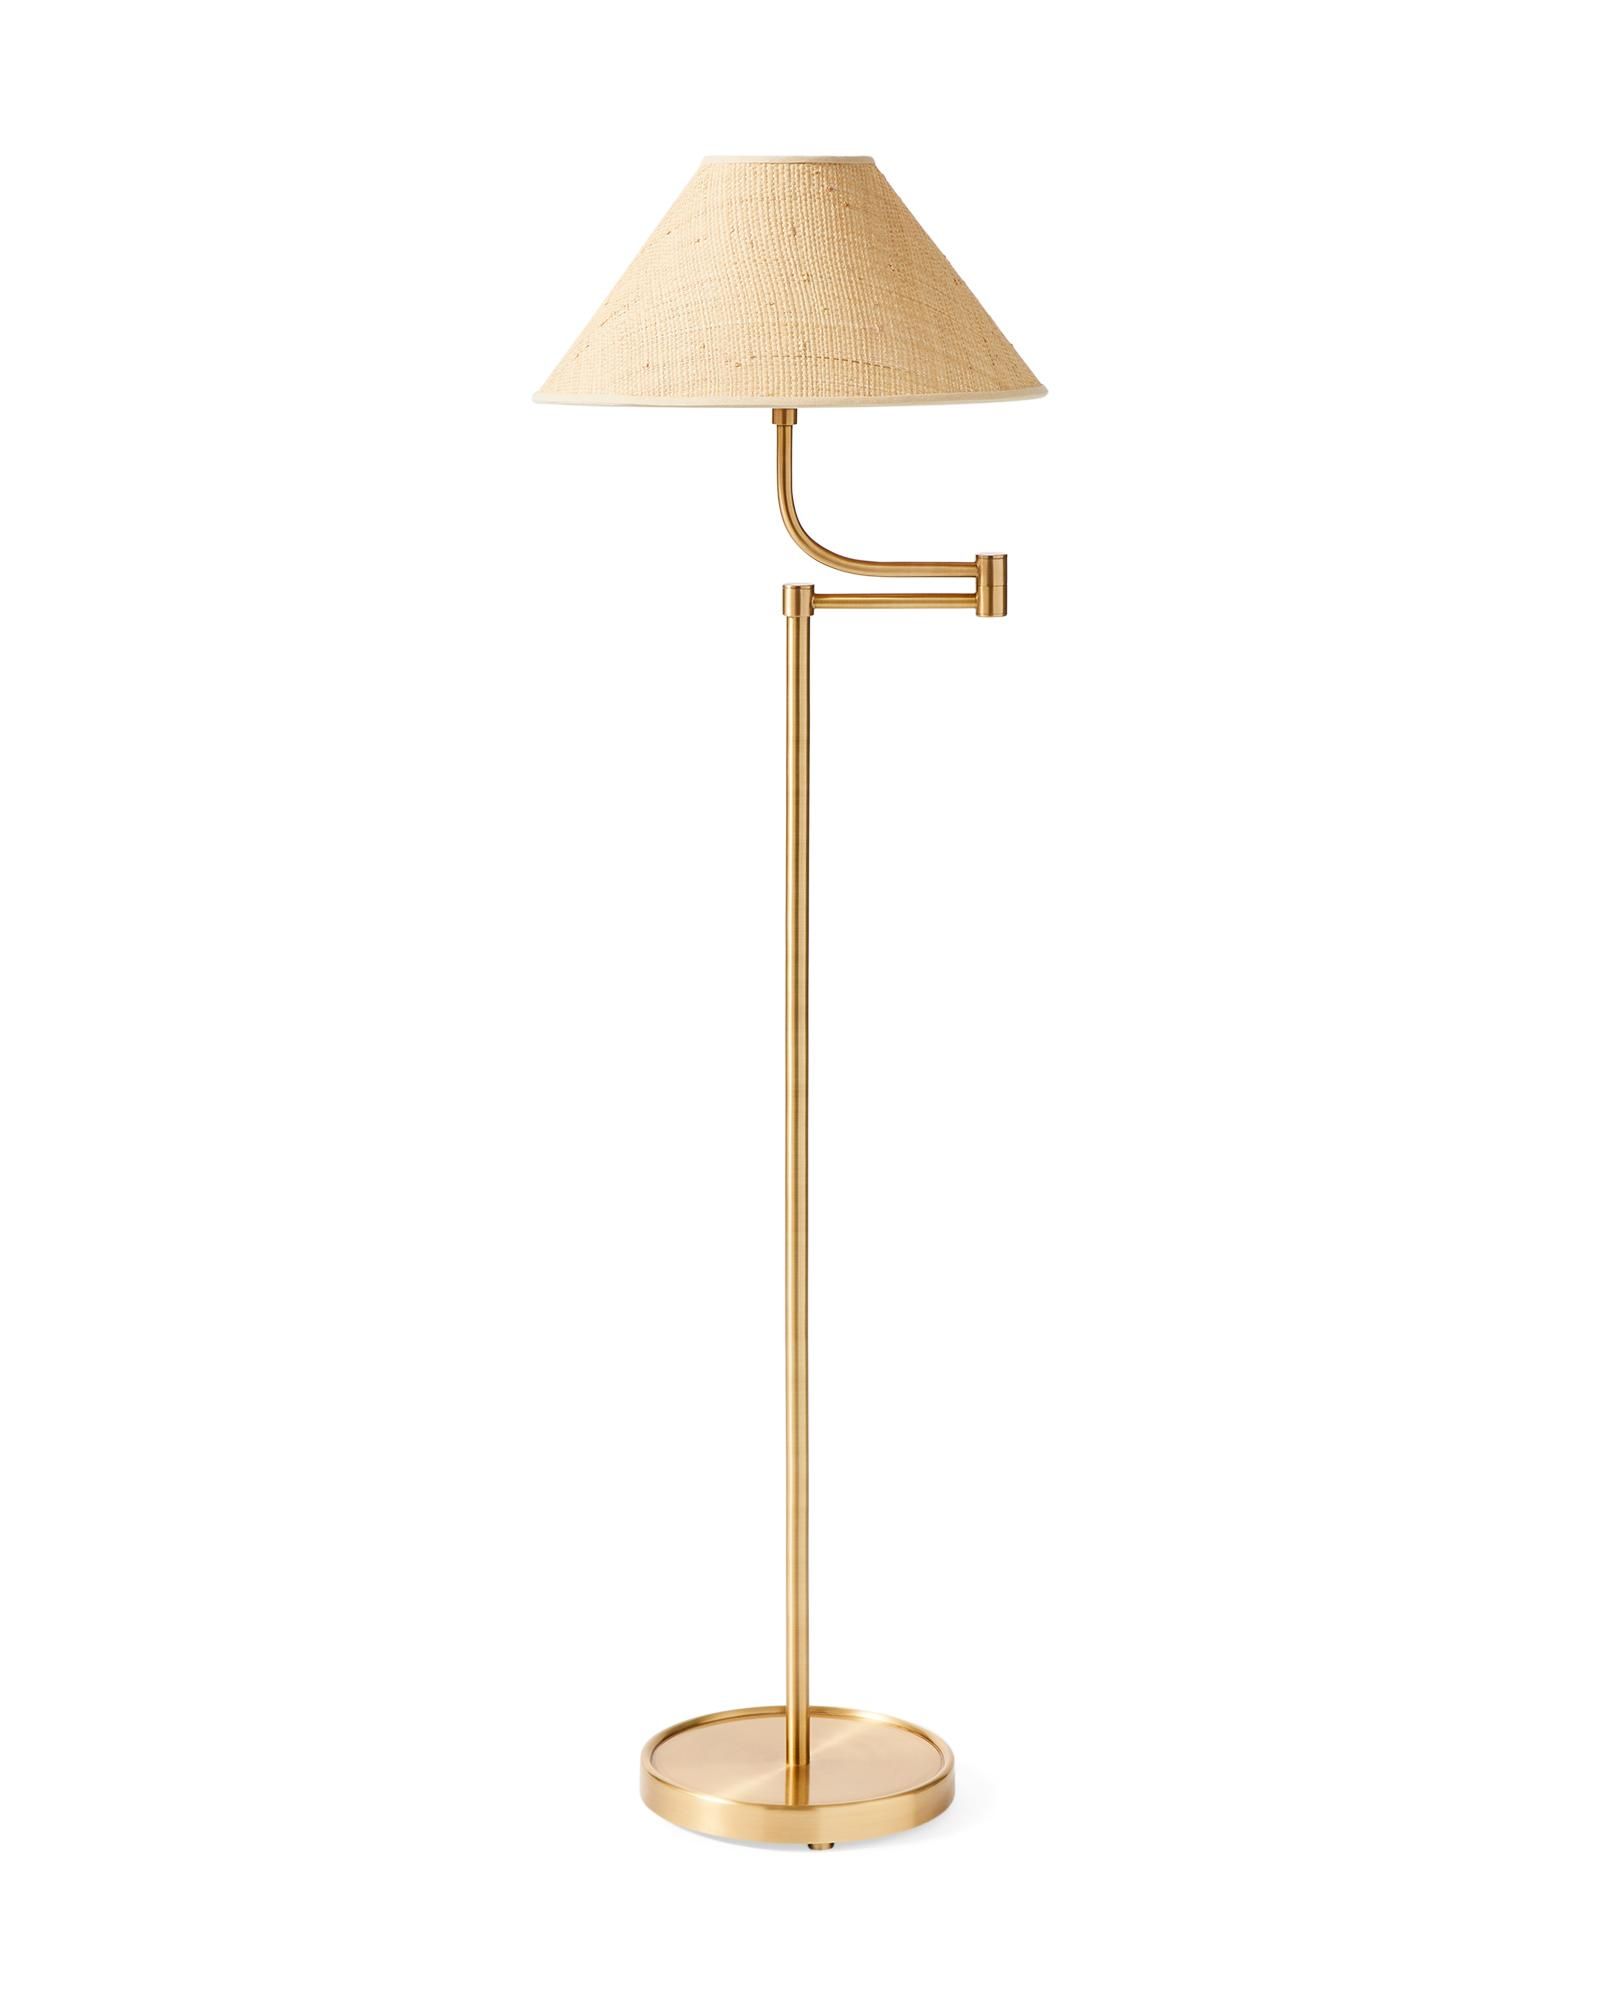 Marseille Floor Lamp | Serena and Lily